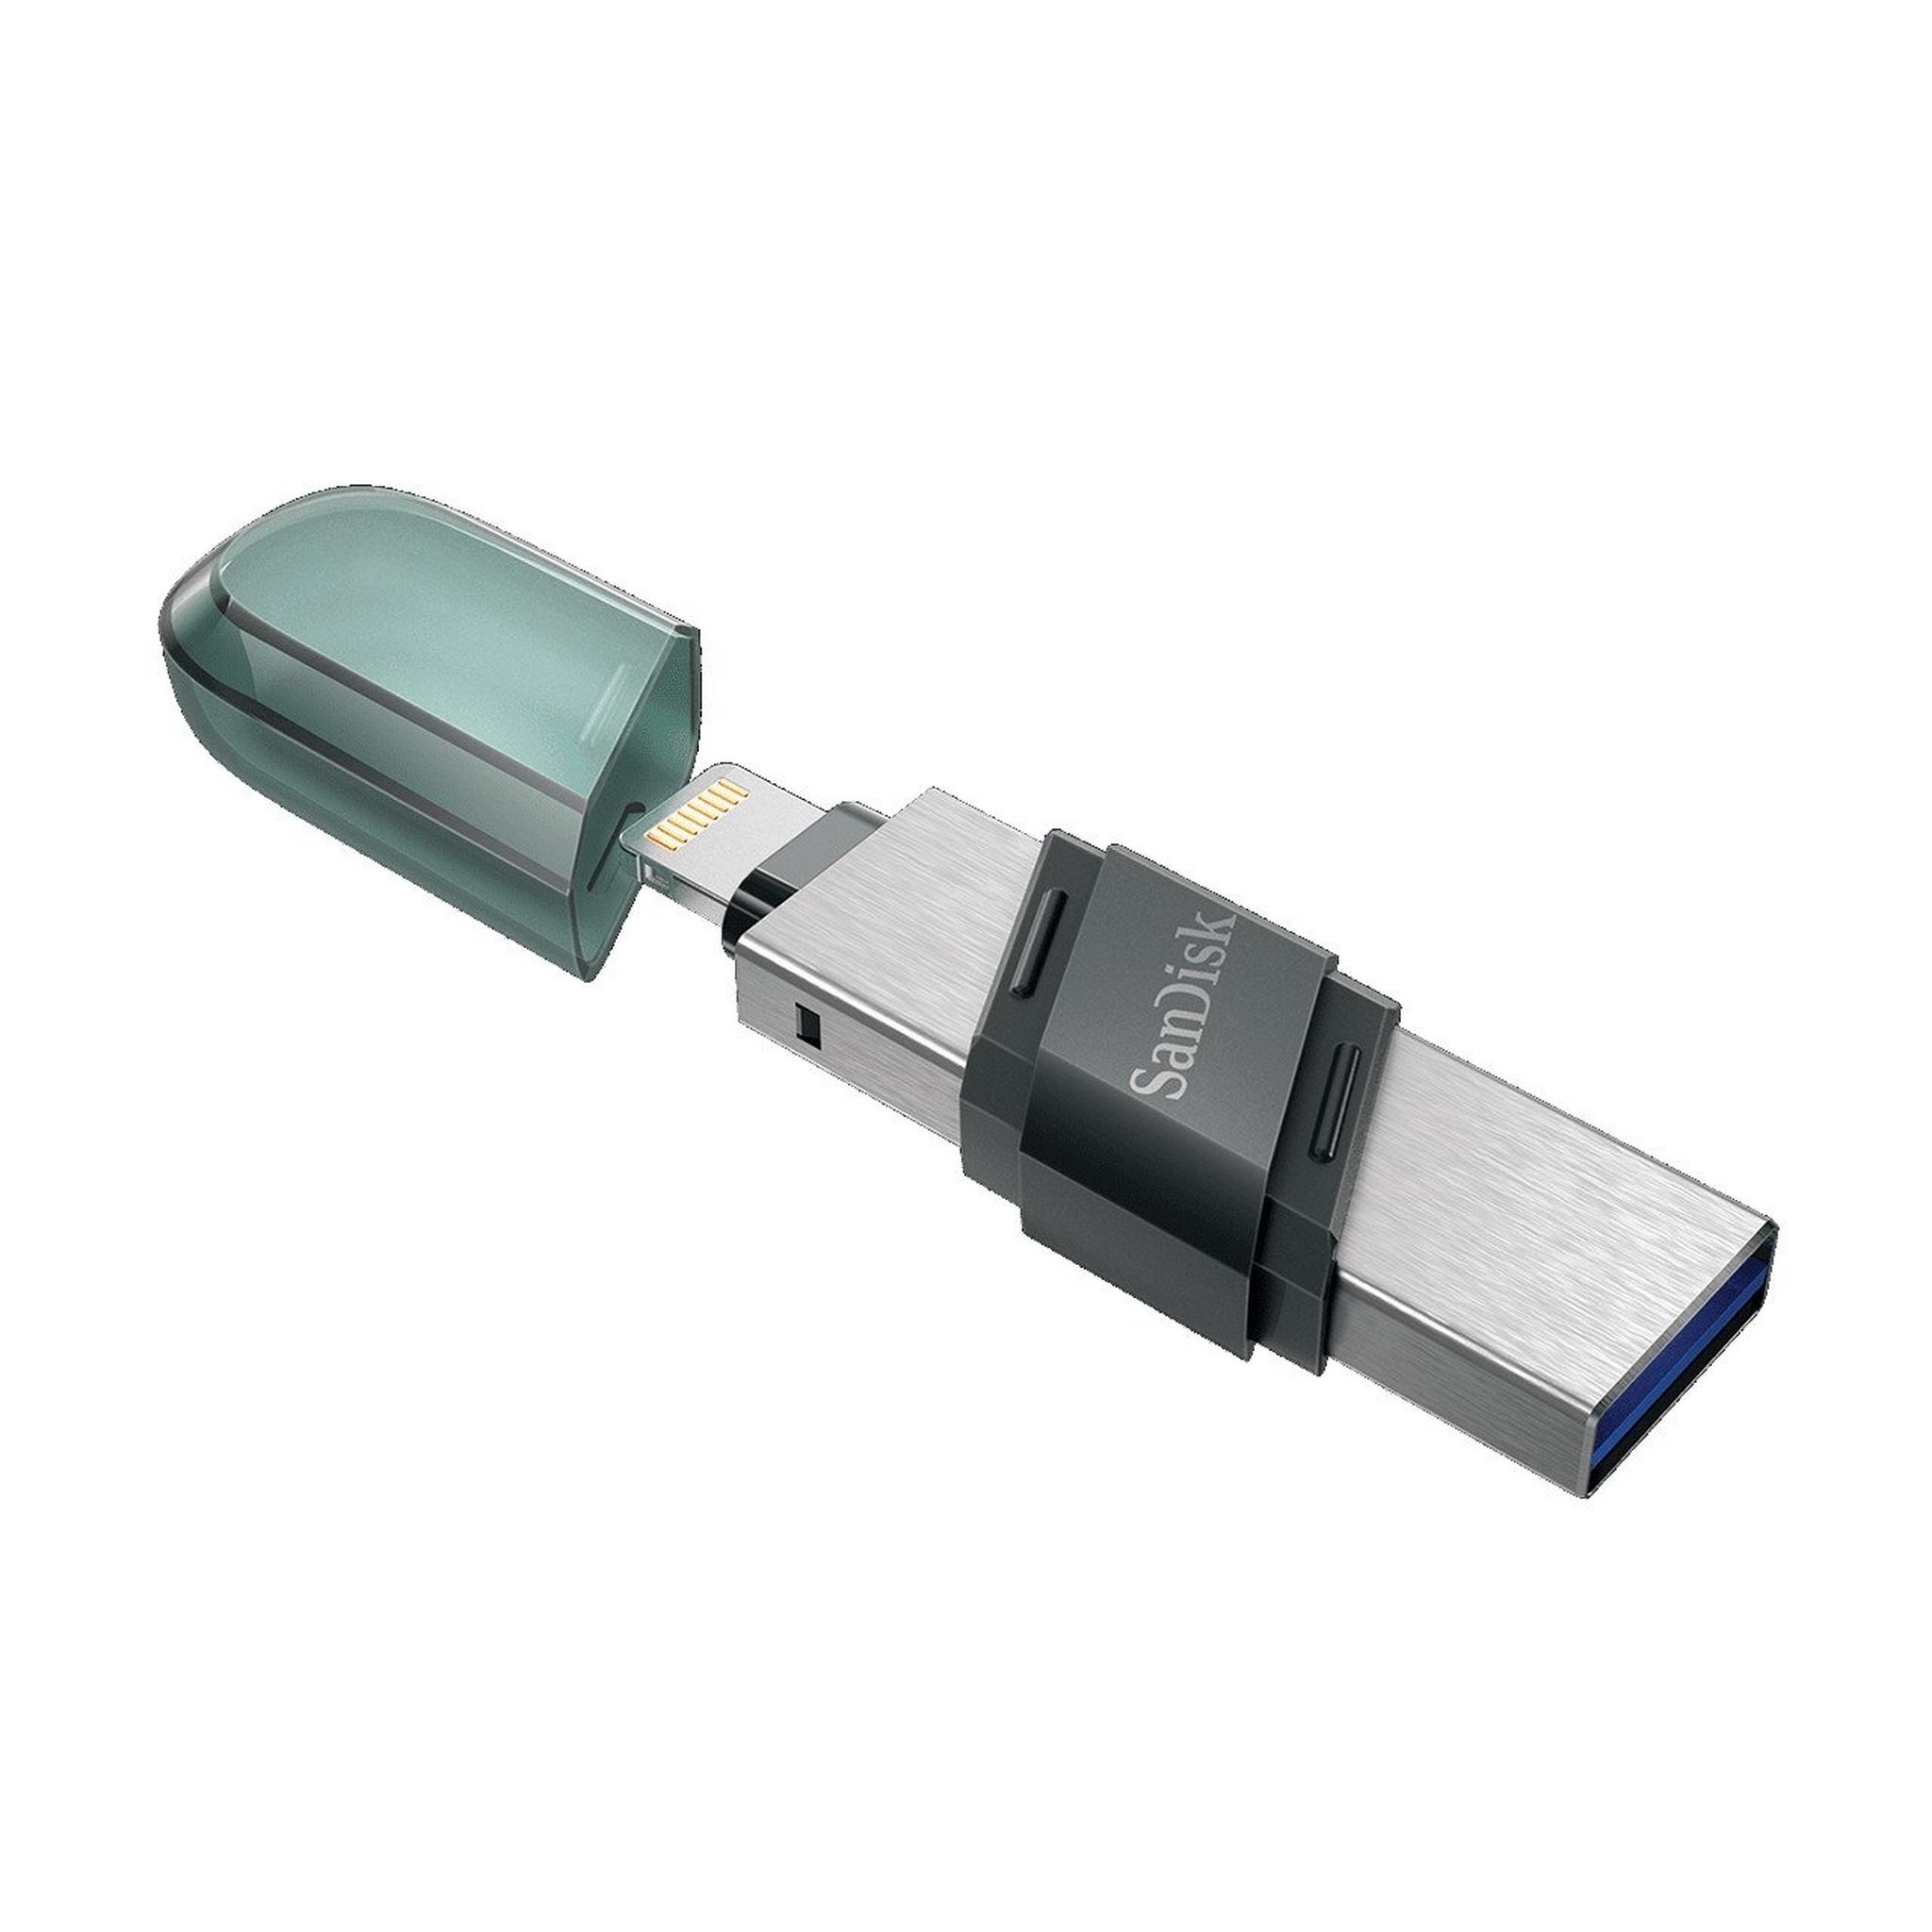 SanDisk 256GB iXpand Flip Flash Drive USB 3.1 and Lightening, for iOS, Windows and Mac